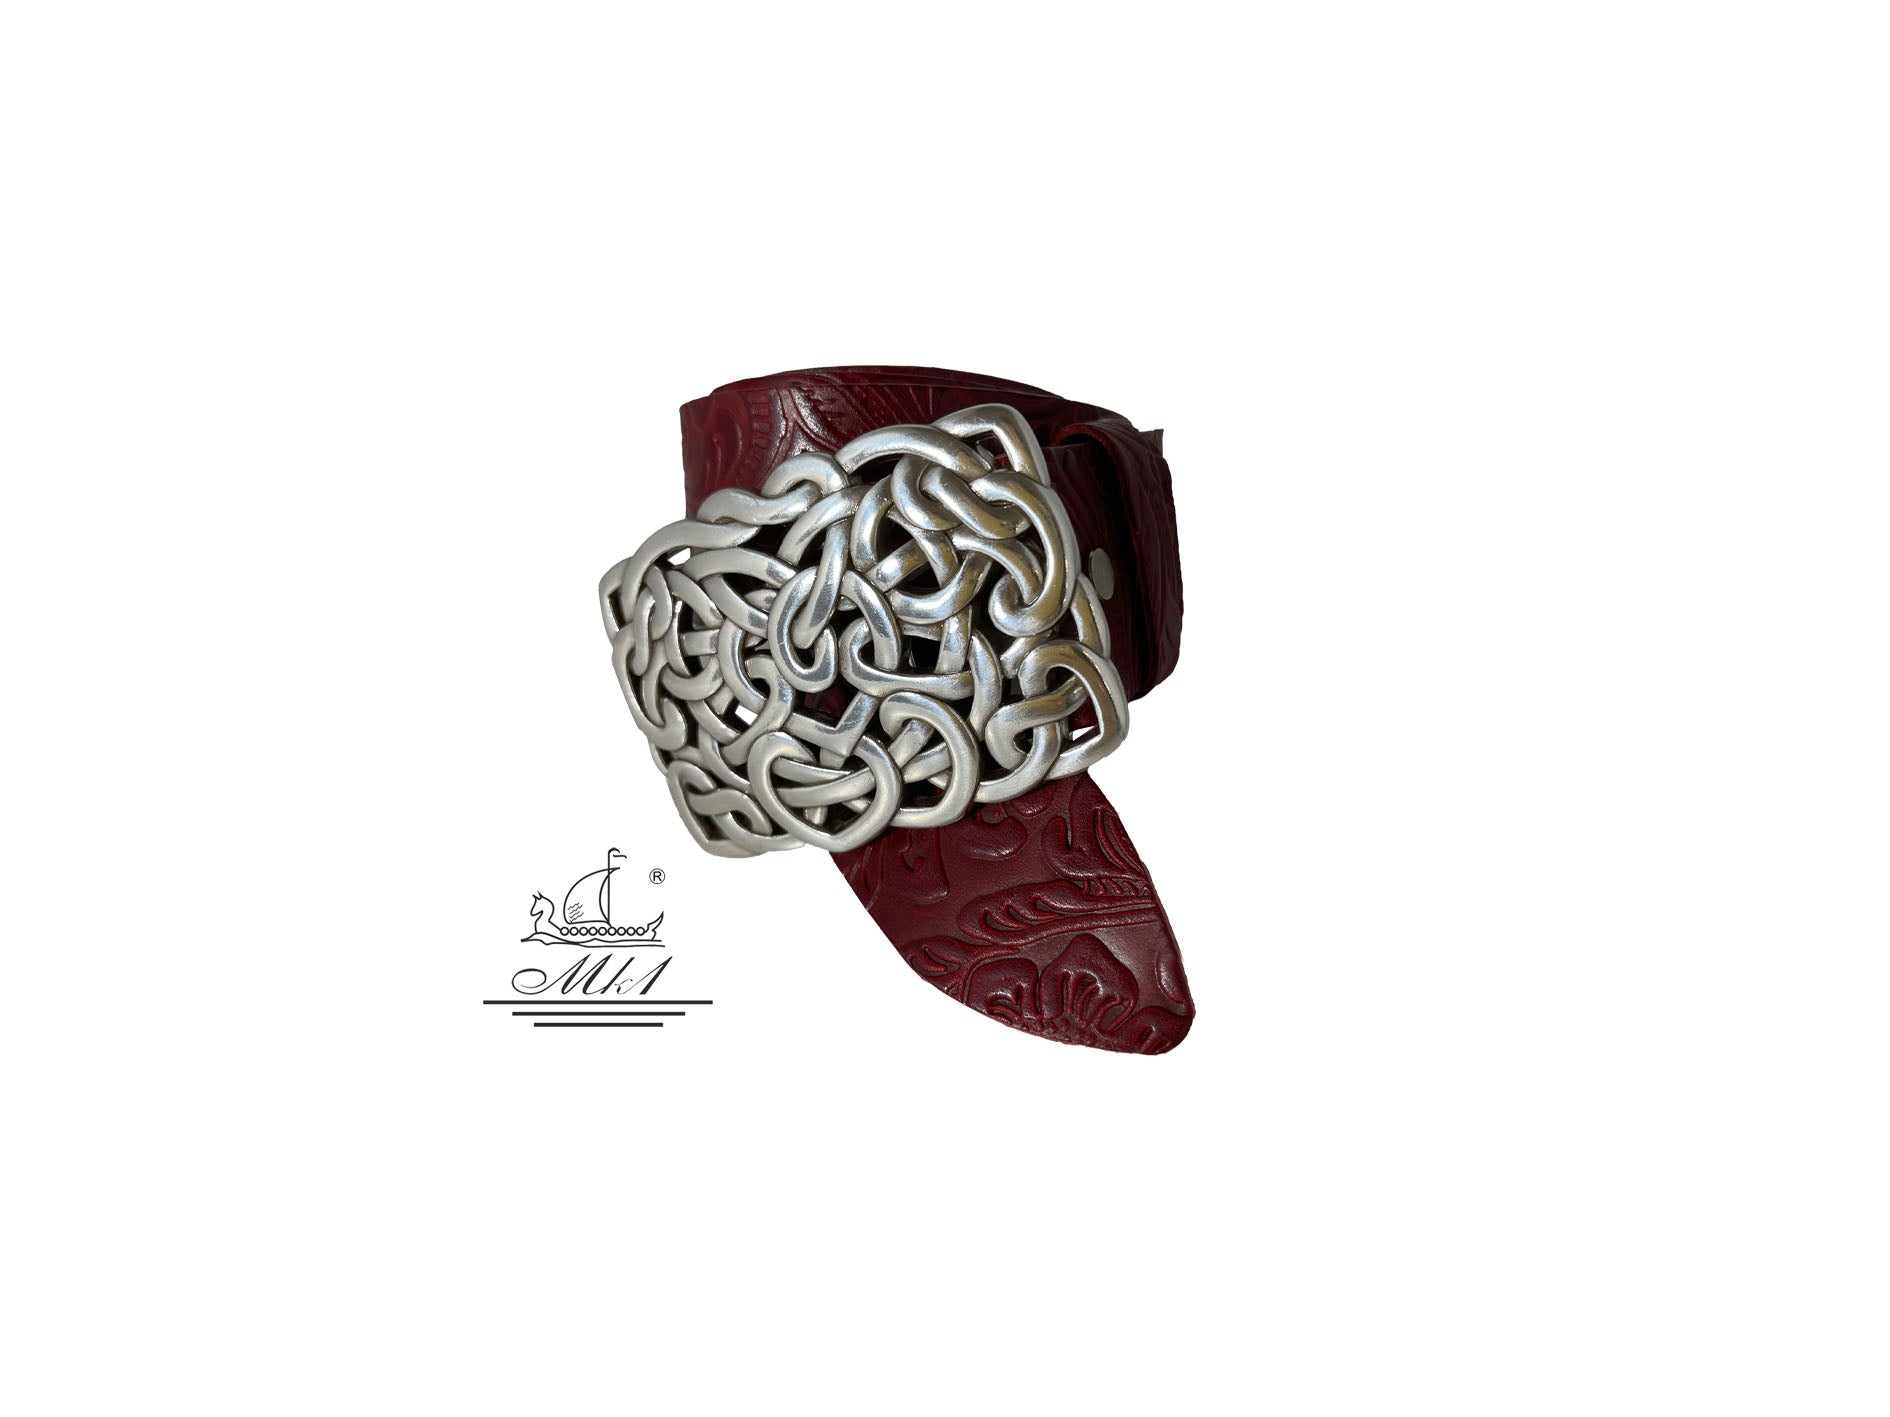 Woman's 4cm wide belt handcrafted from red leather with flower design. 100148/40kk/ll